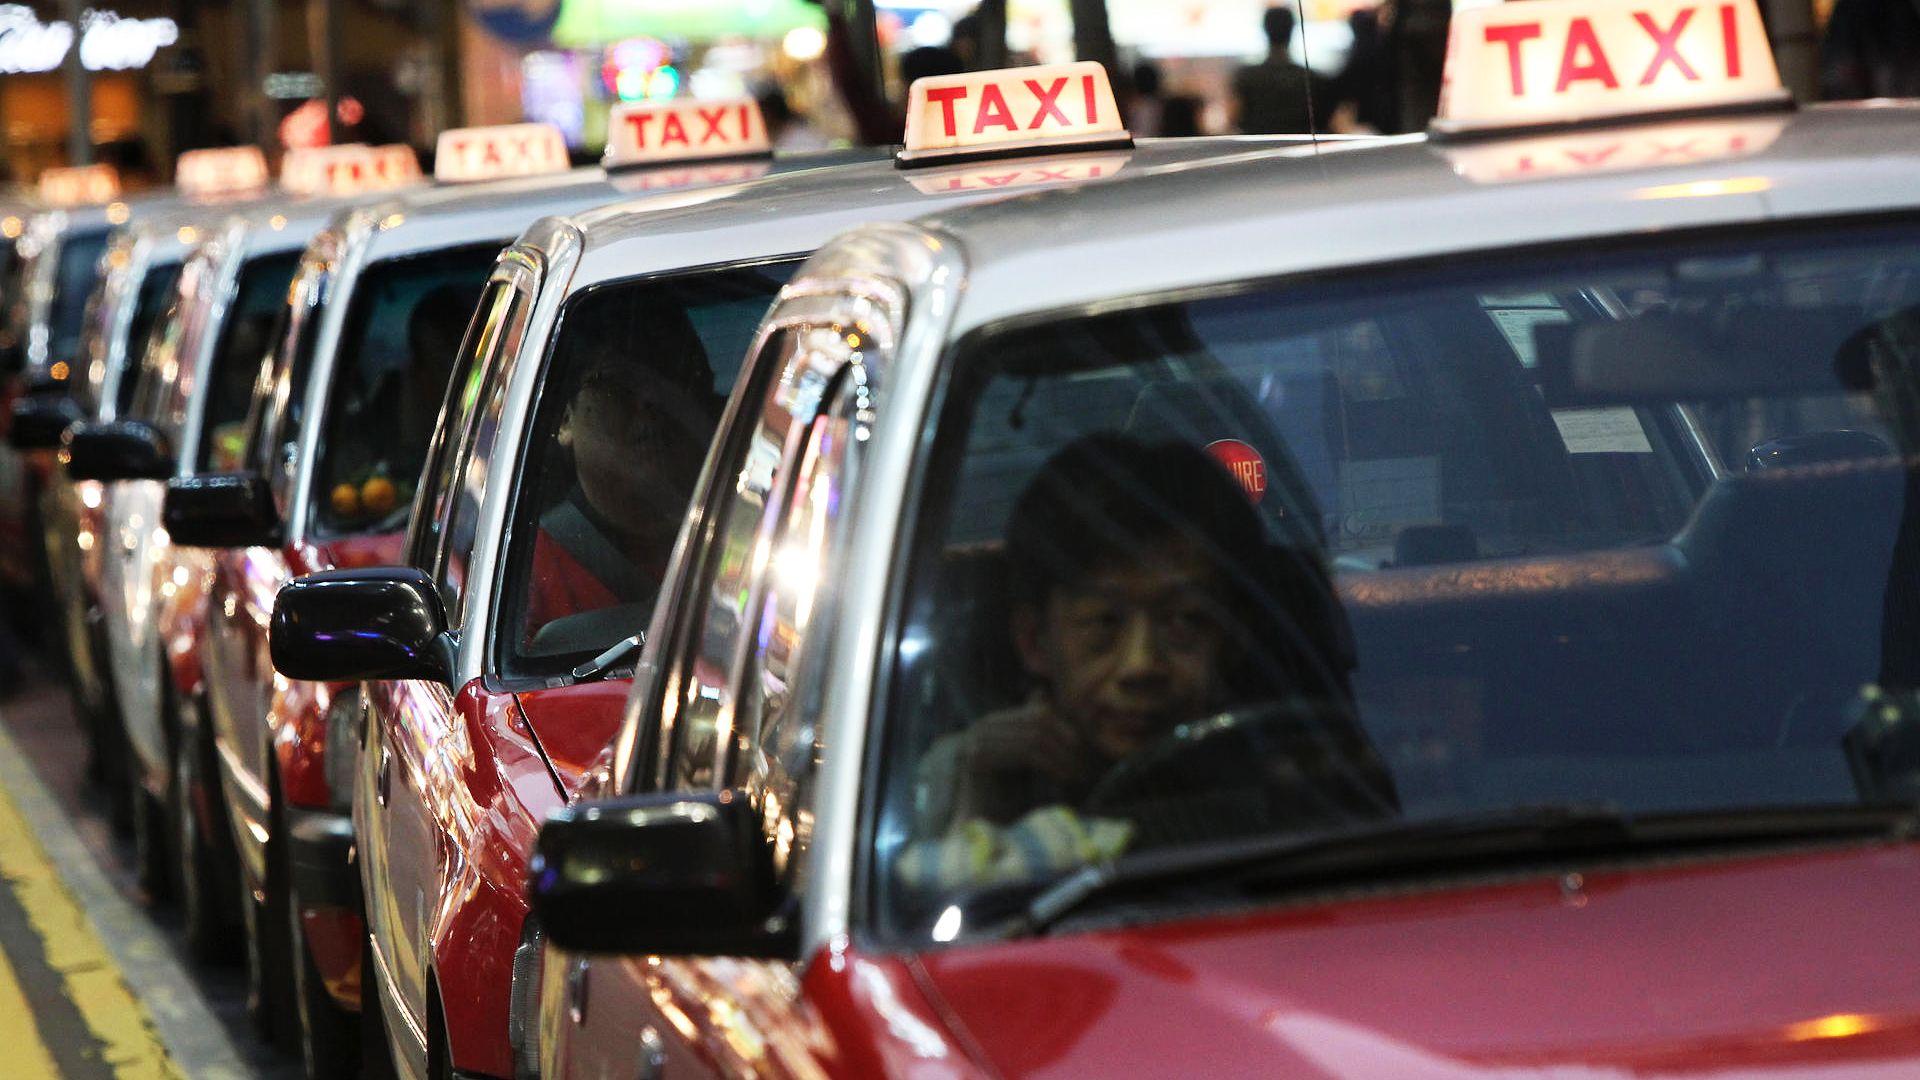 Taxi Driver Causes Huge Controversy After Uploading This Picture